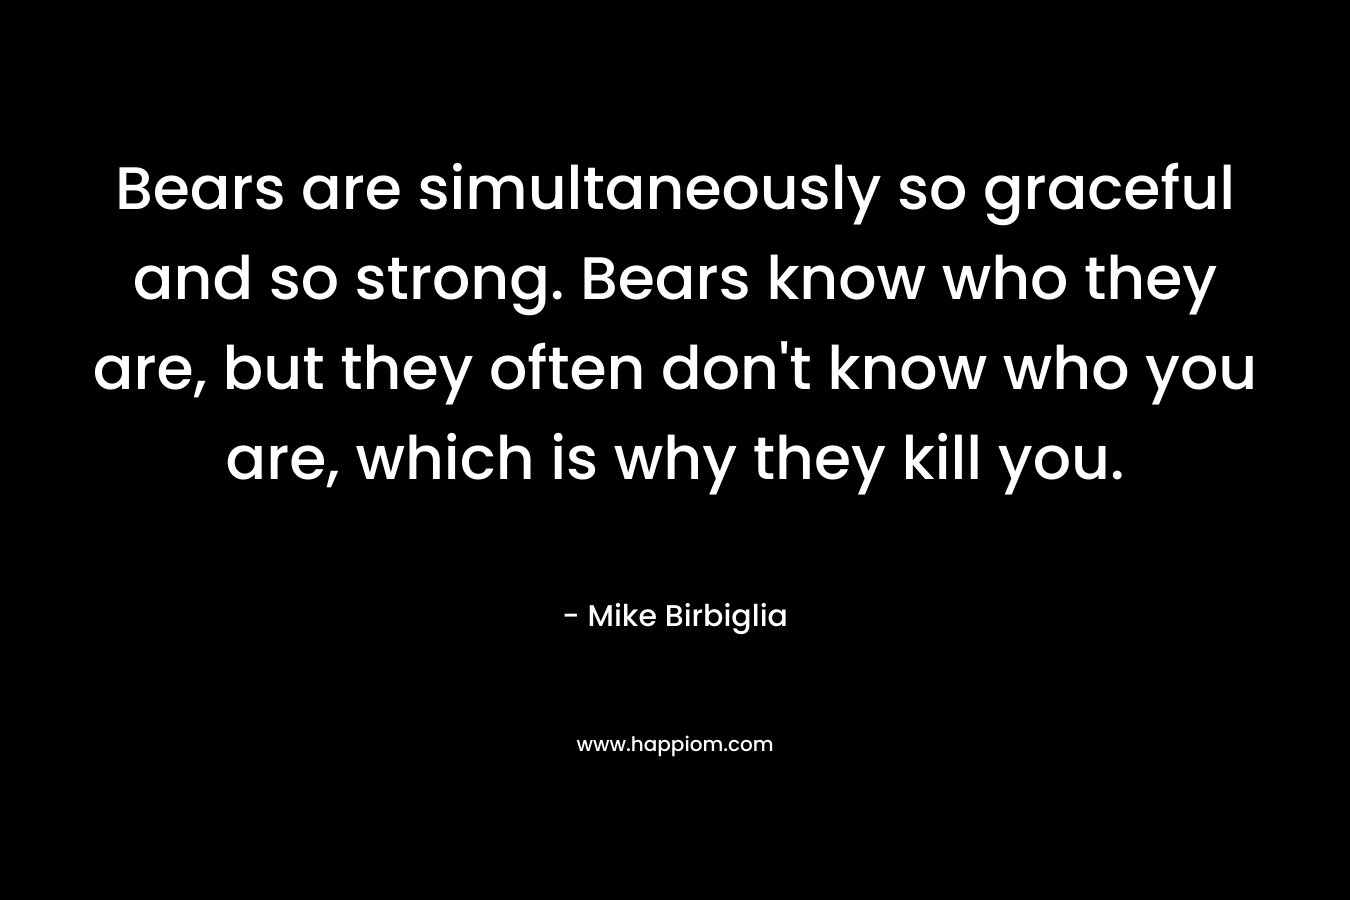 Bears are simultaneously so graceful and so strong. Bears know who they are, but they often don’t know who you are, which is why they kill you. – Mike Birbiglia